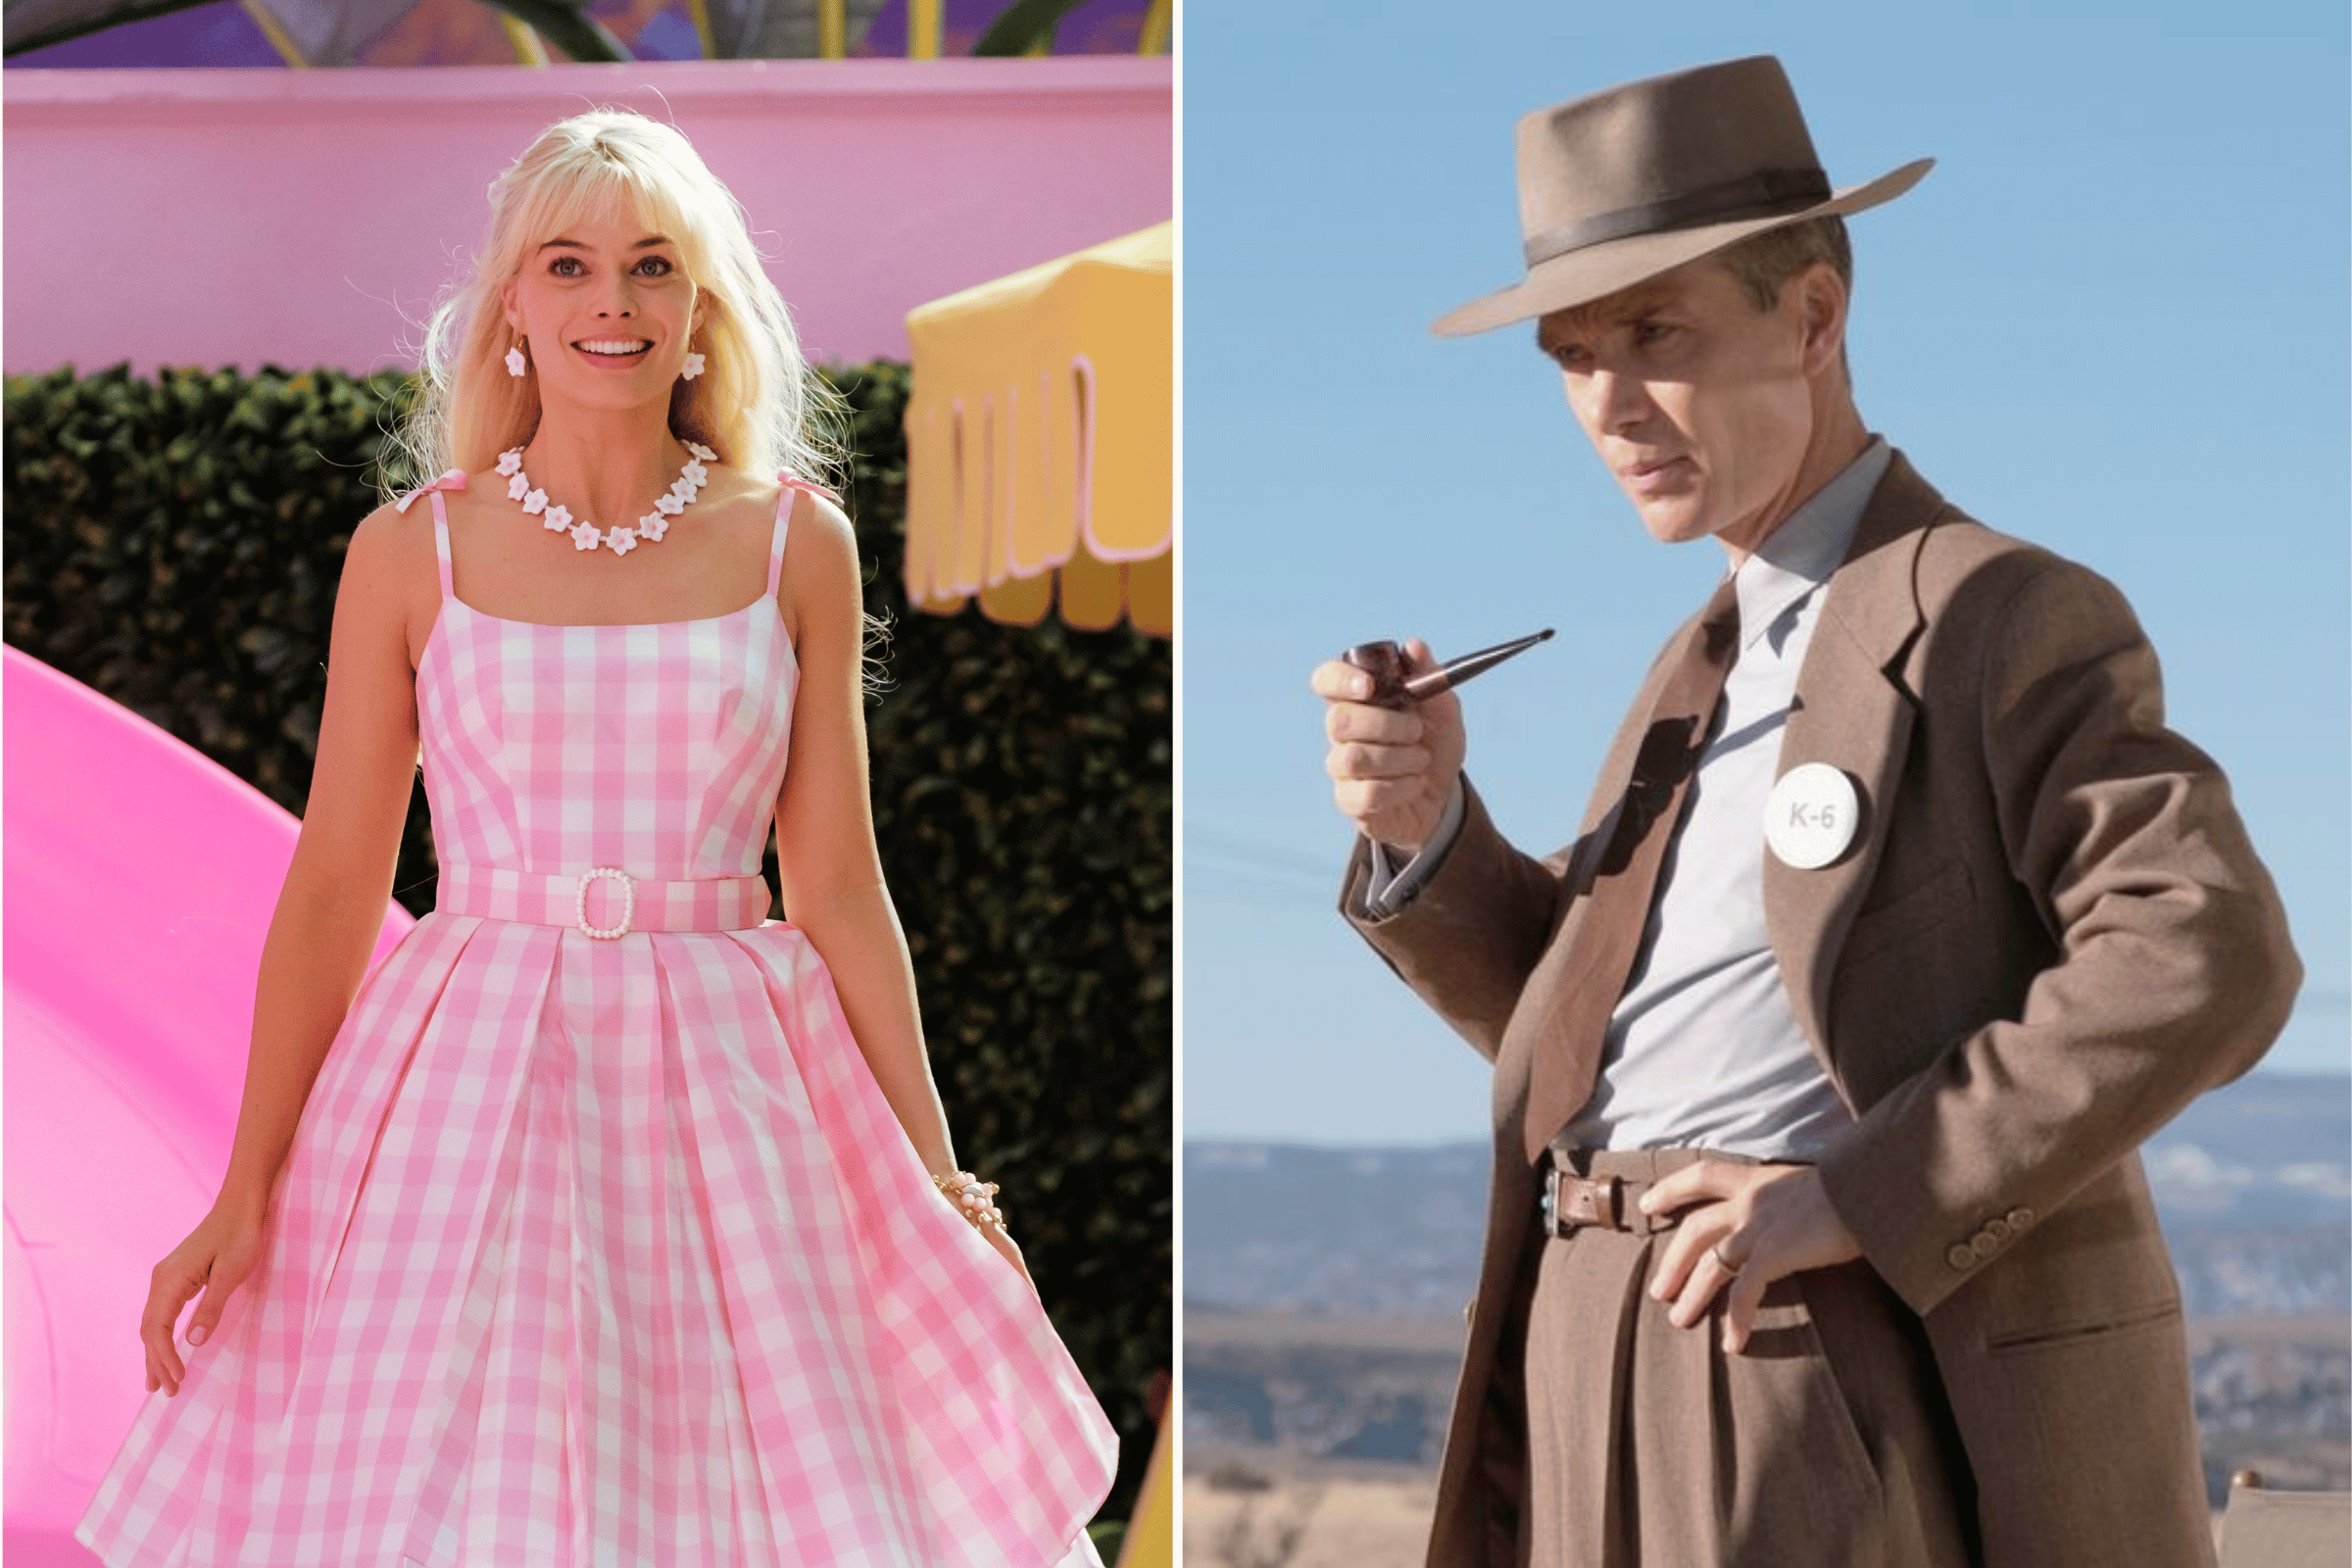 'Barbie' vs 'Oppenheimer' Who Will Win at the Oscars?